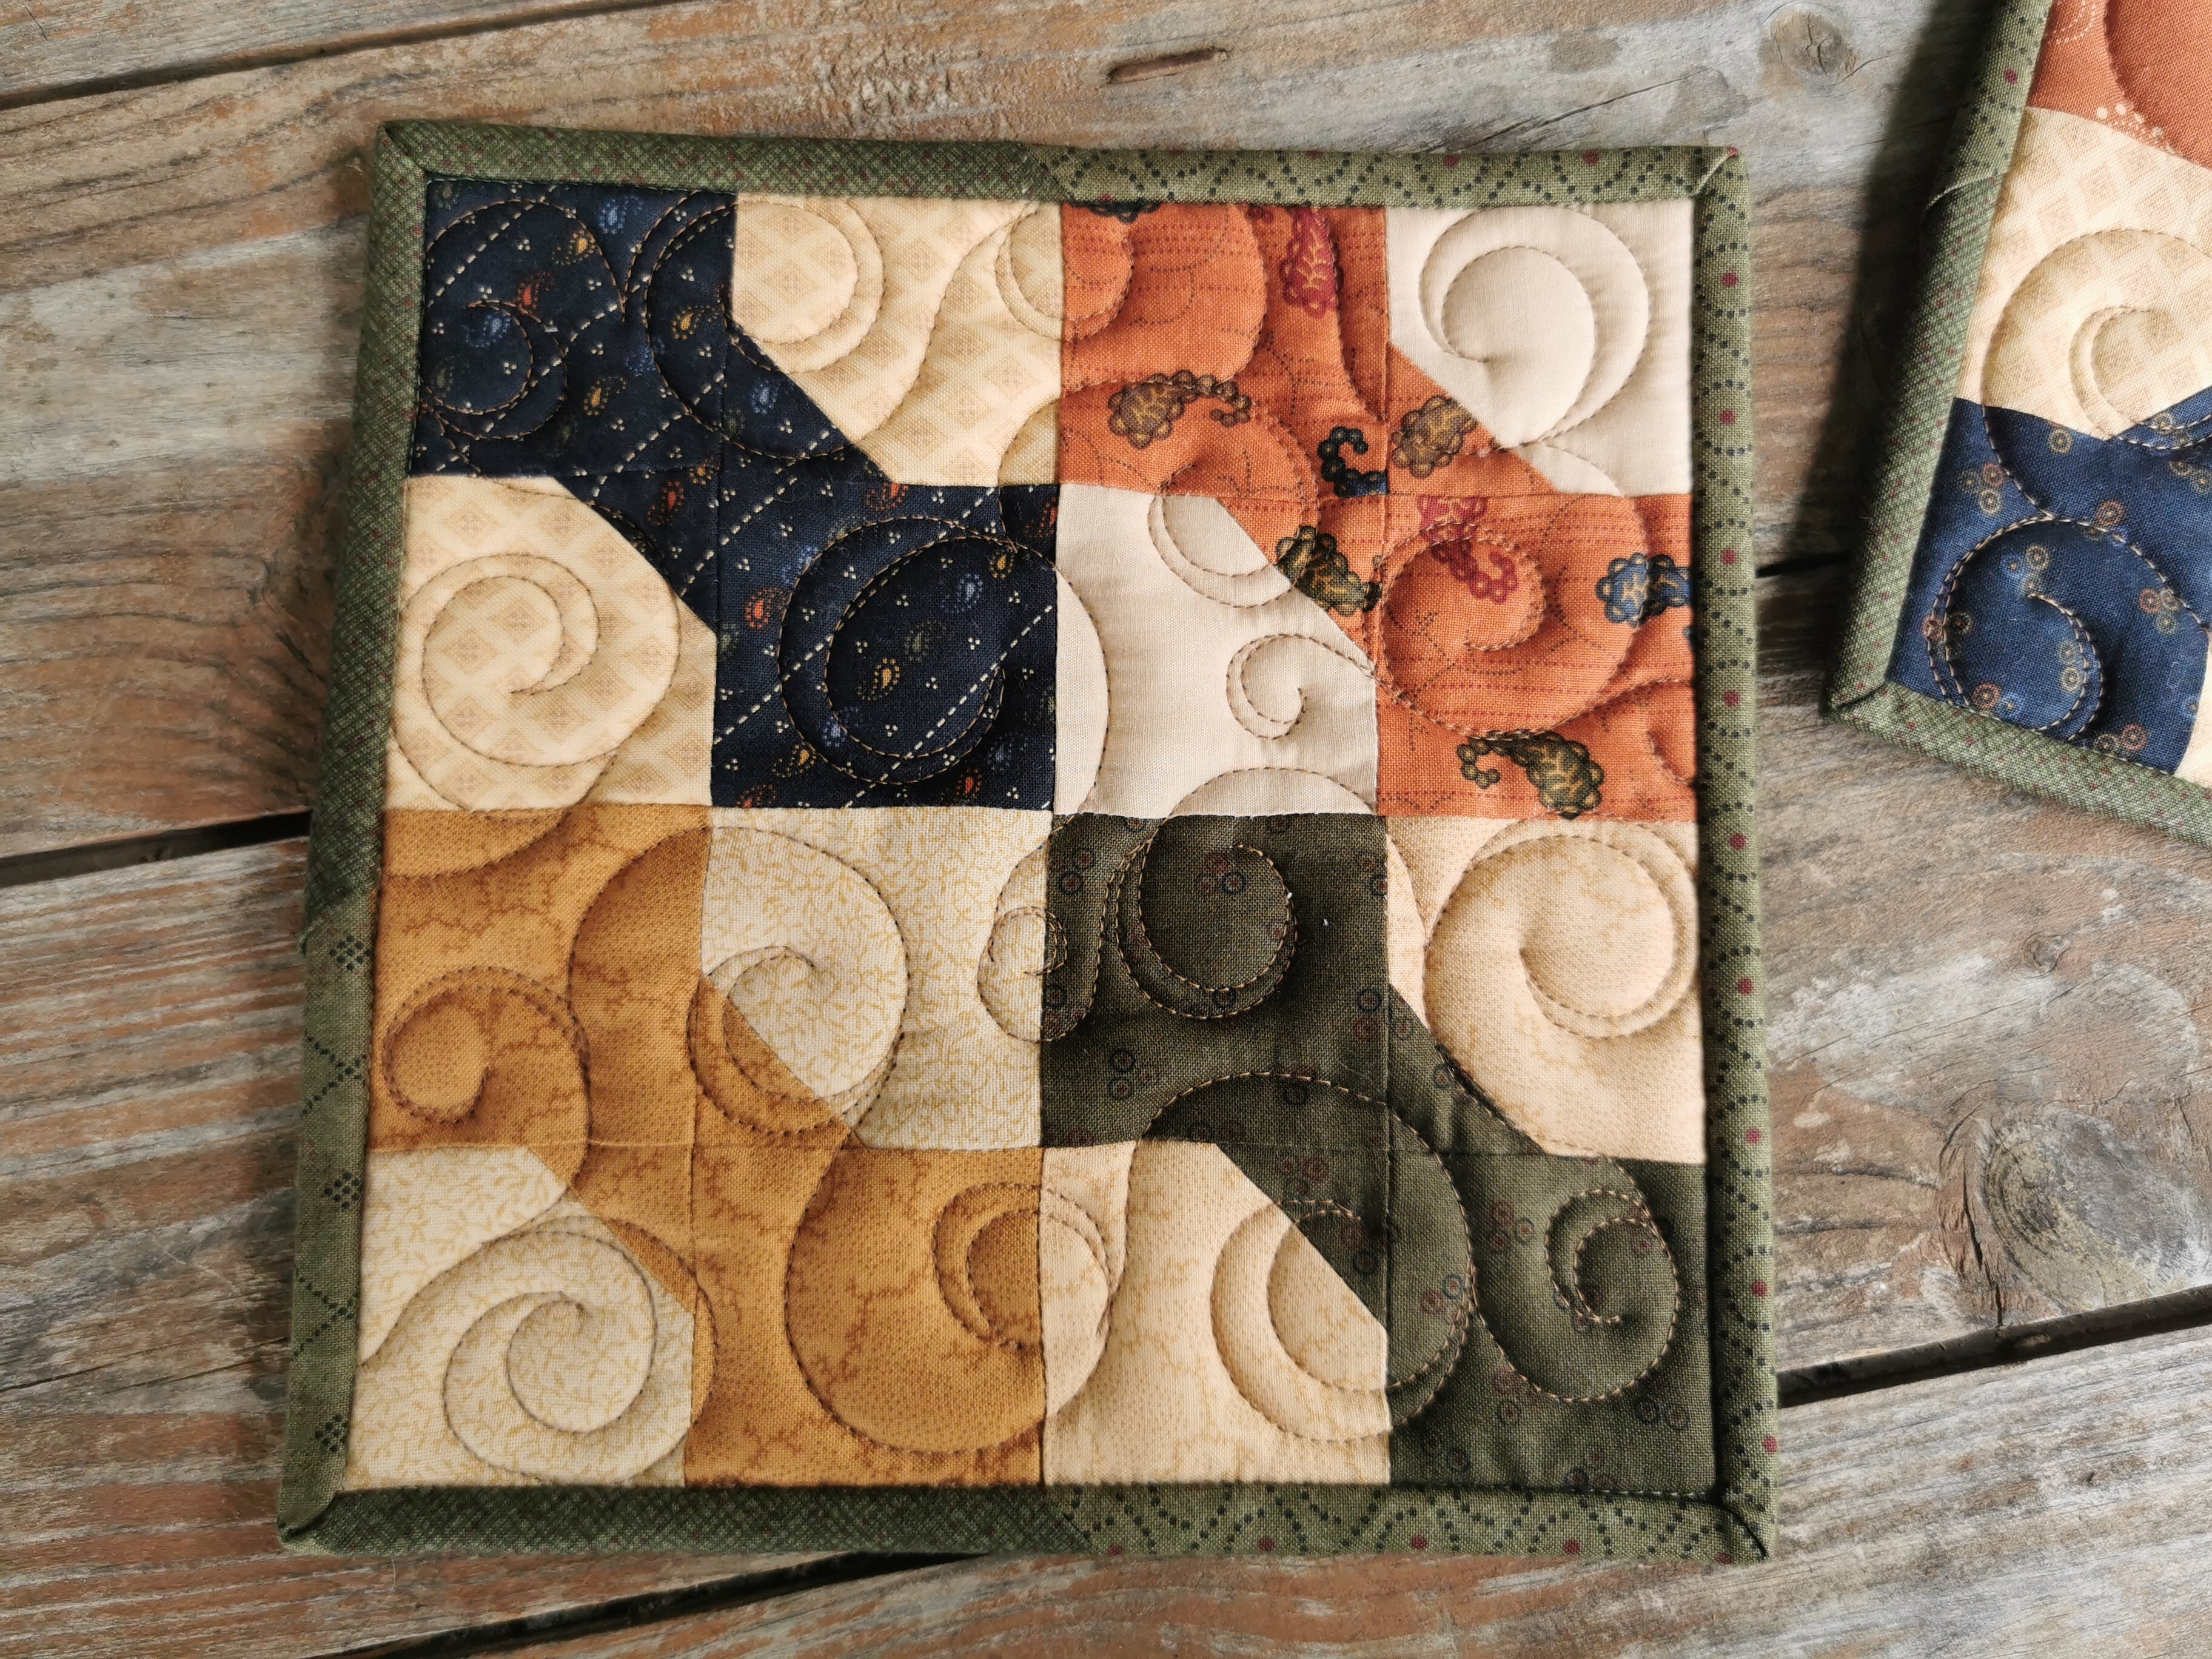 This is a close up of one of the quilted potholders showing the bowtie patchwork, fabric designs and swirl quilting.